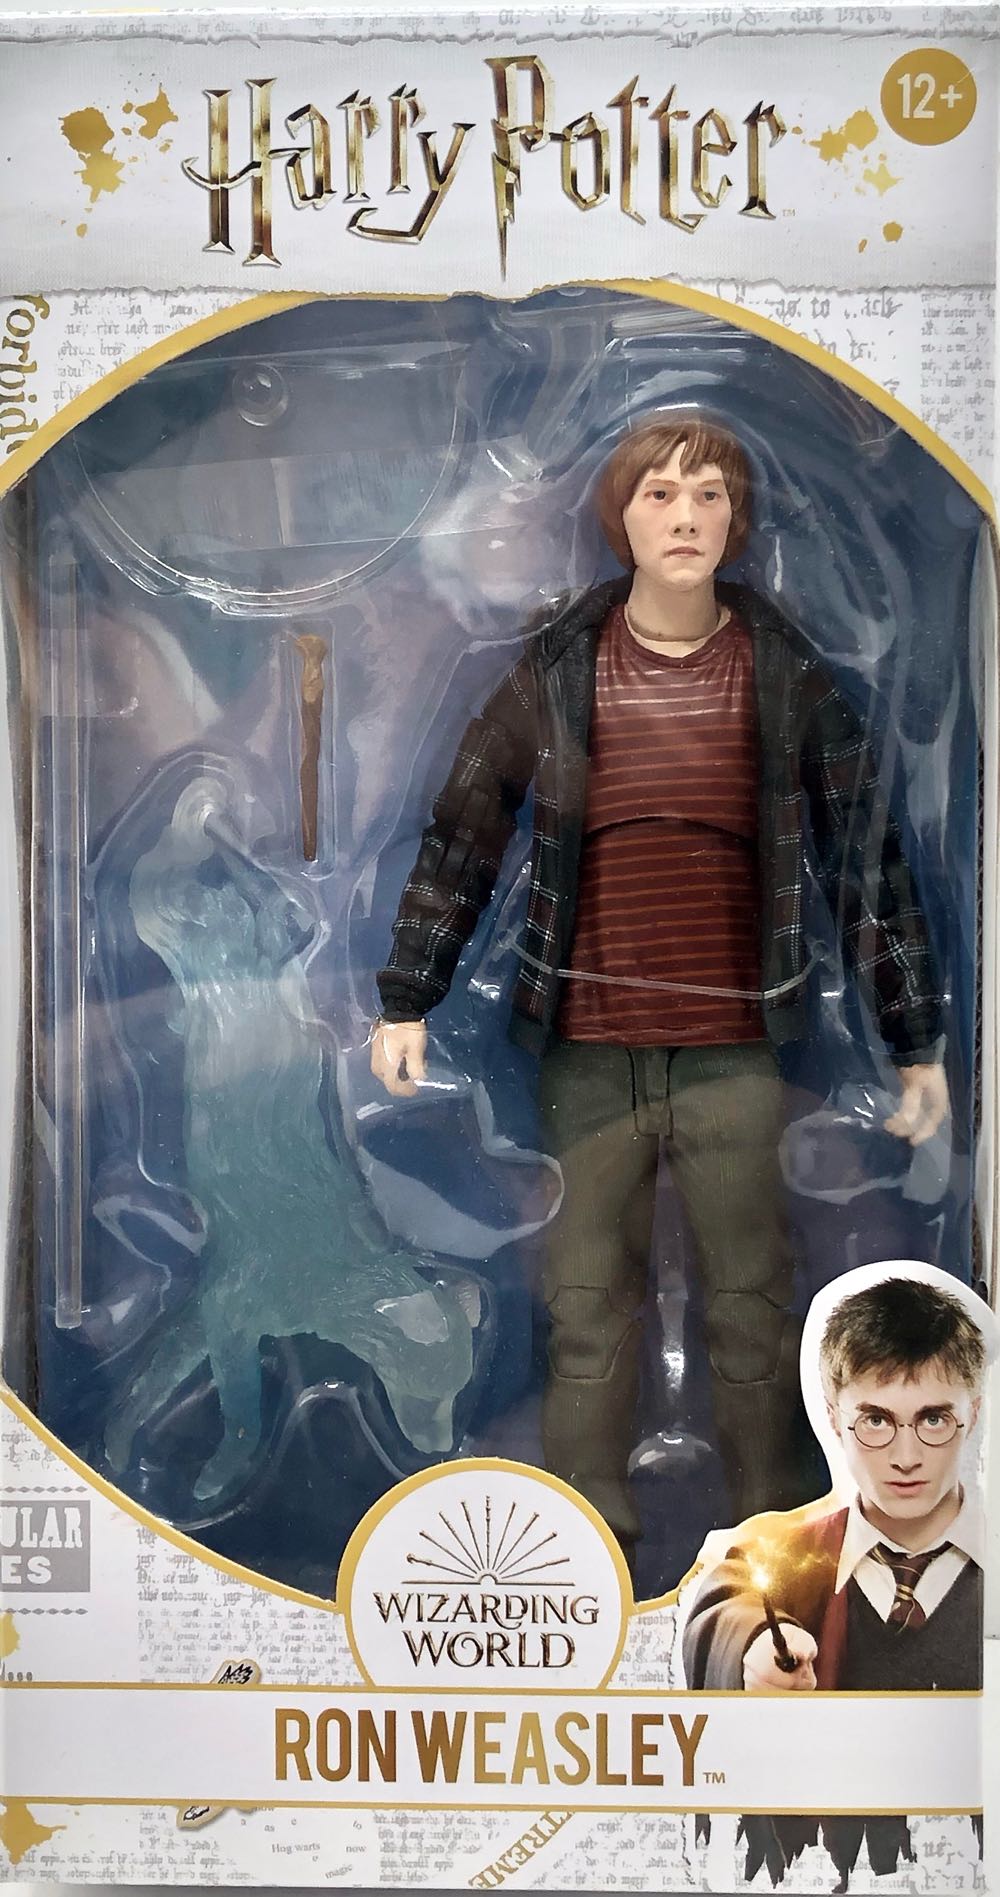 HP Ron Weasley - McFarlane Toys (Harry Potter) (Harry Potter) action figure collectible - Main Image 1